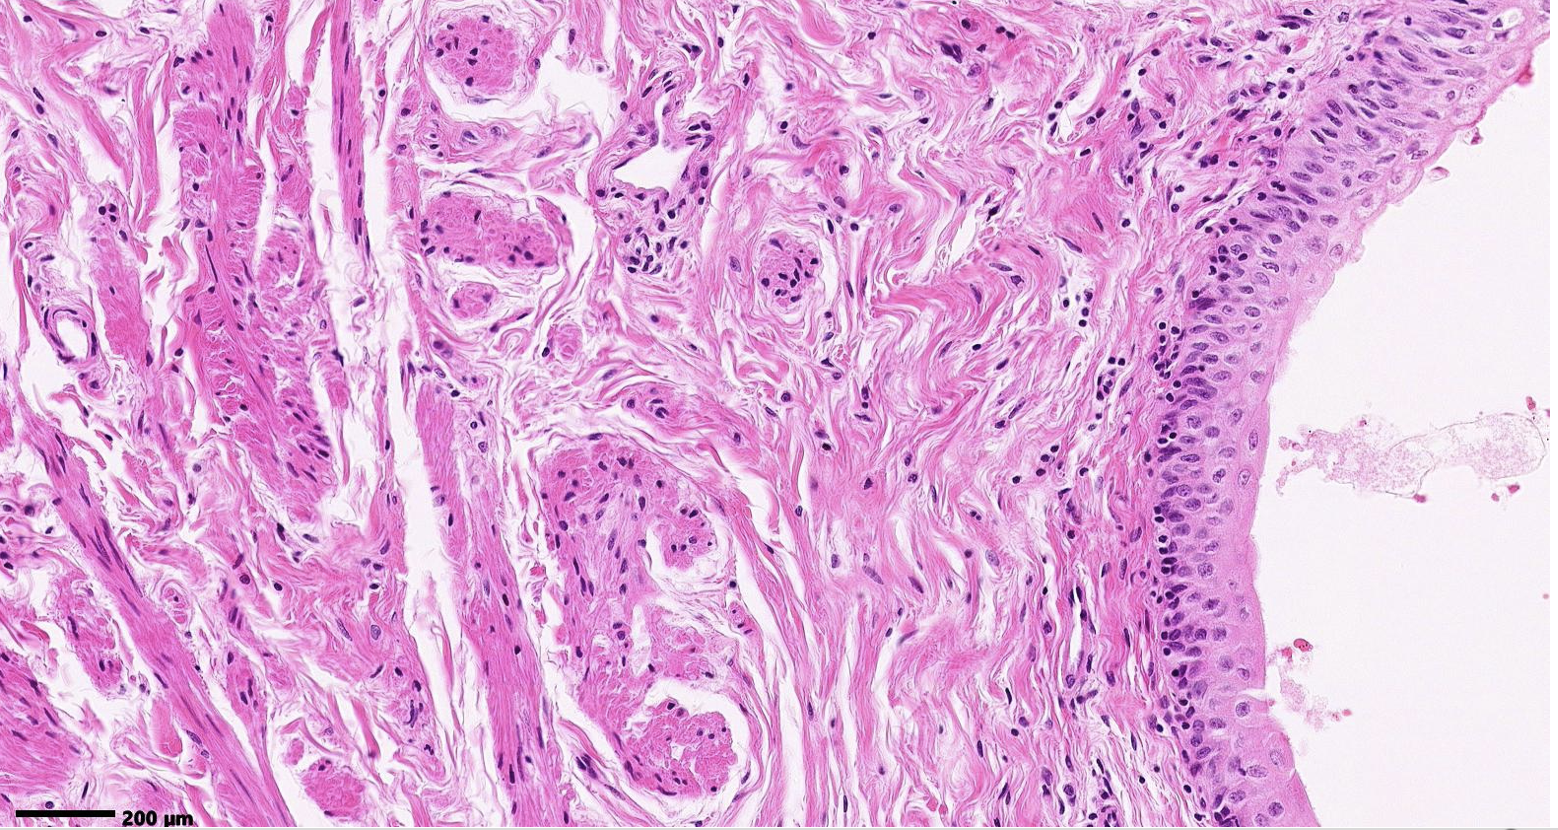 <p>What tissue is shown? bonus point if you know where it is</p>